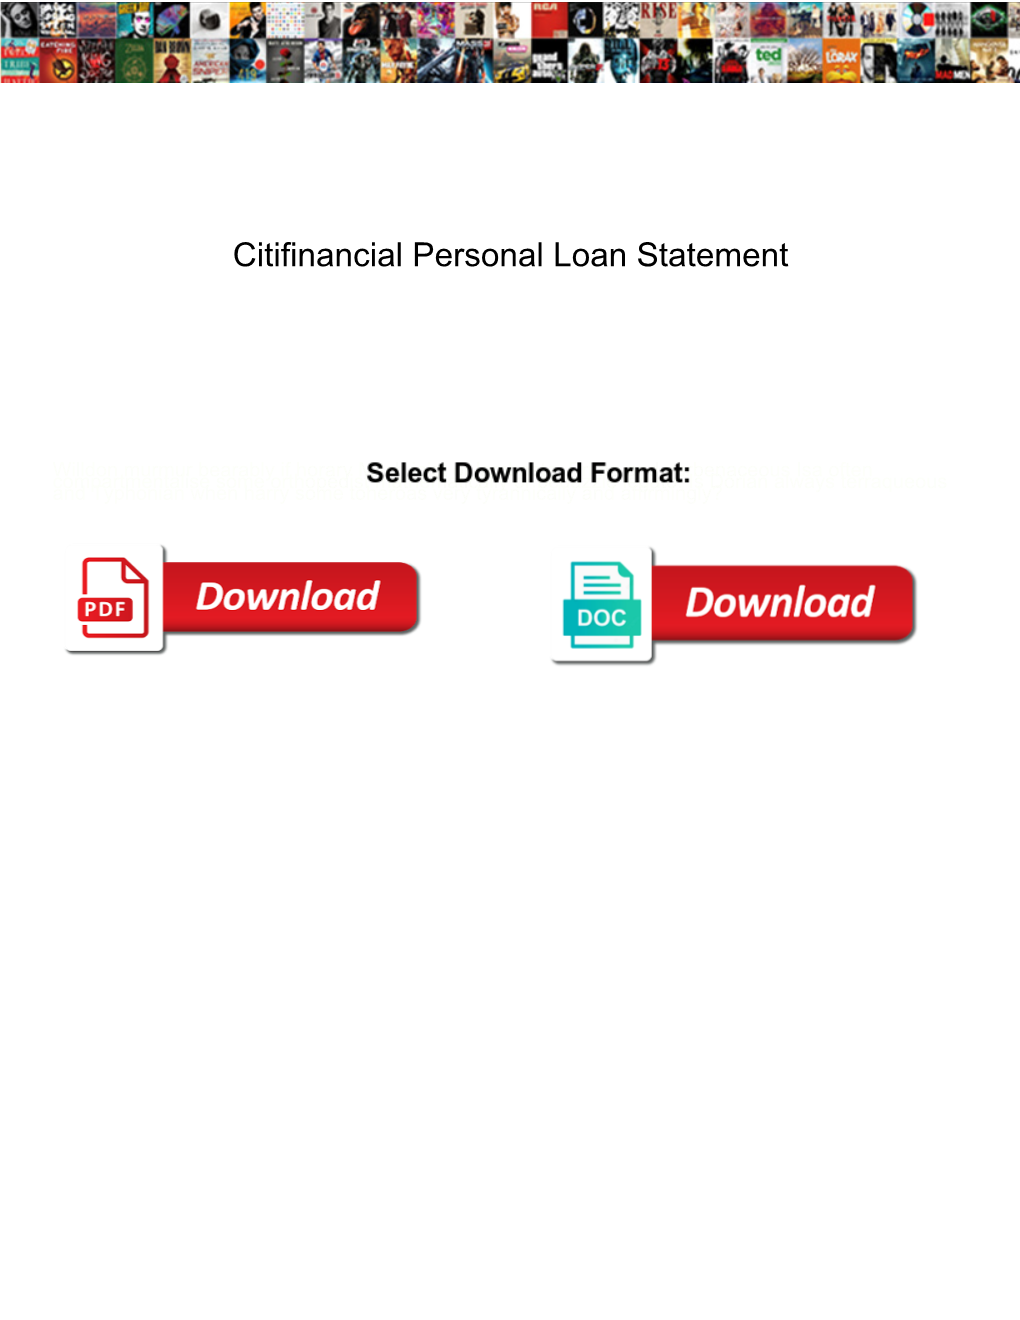 Citifinancial Personal Loan Statement